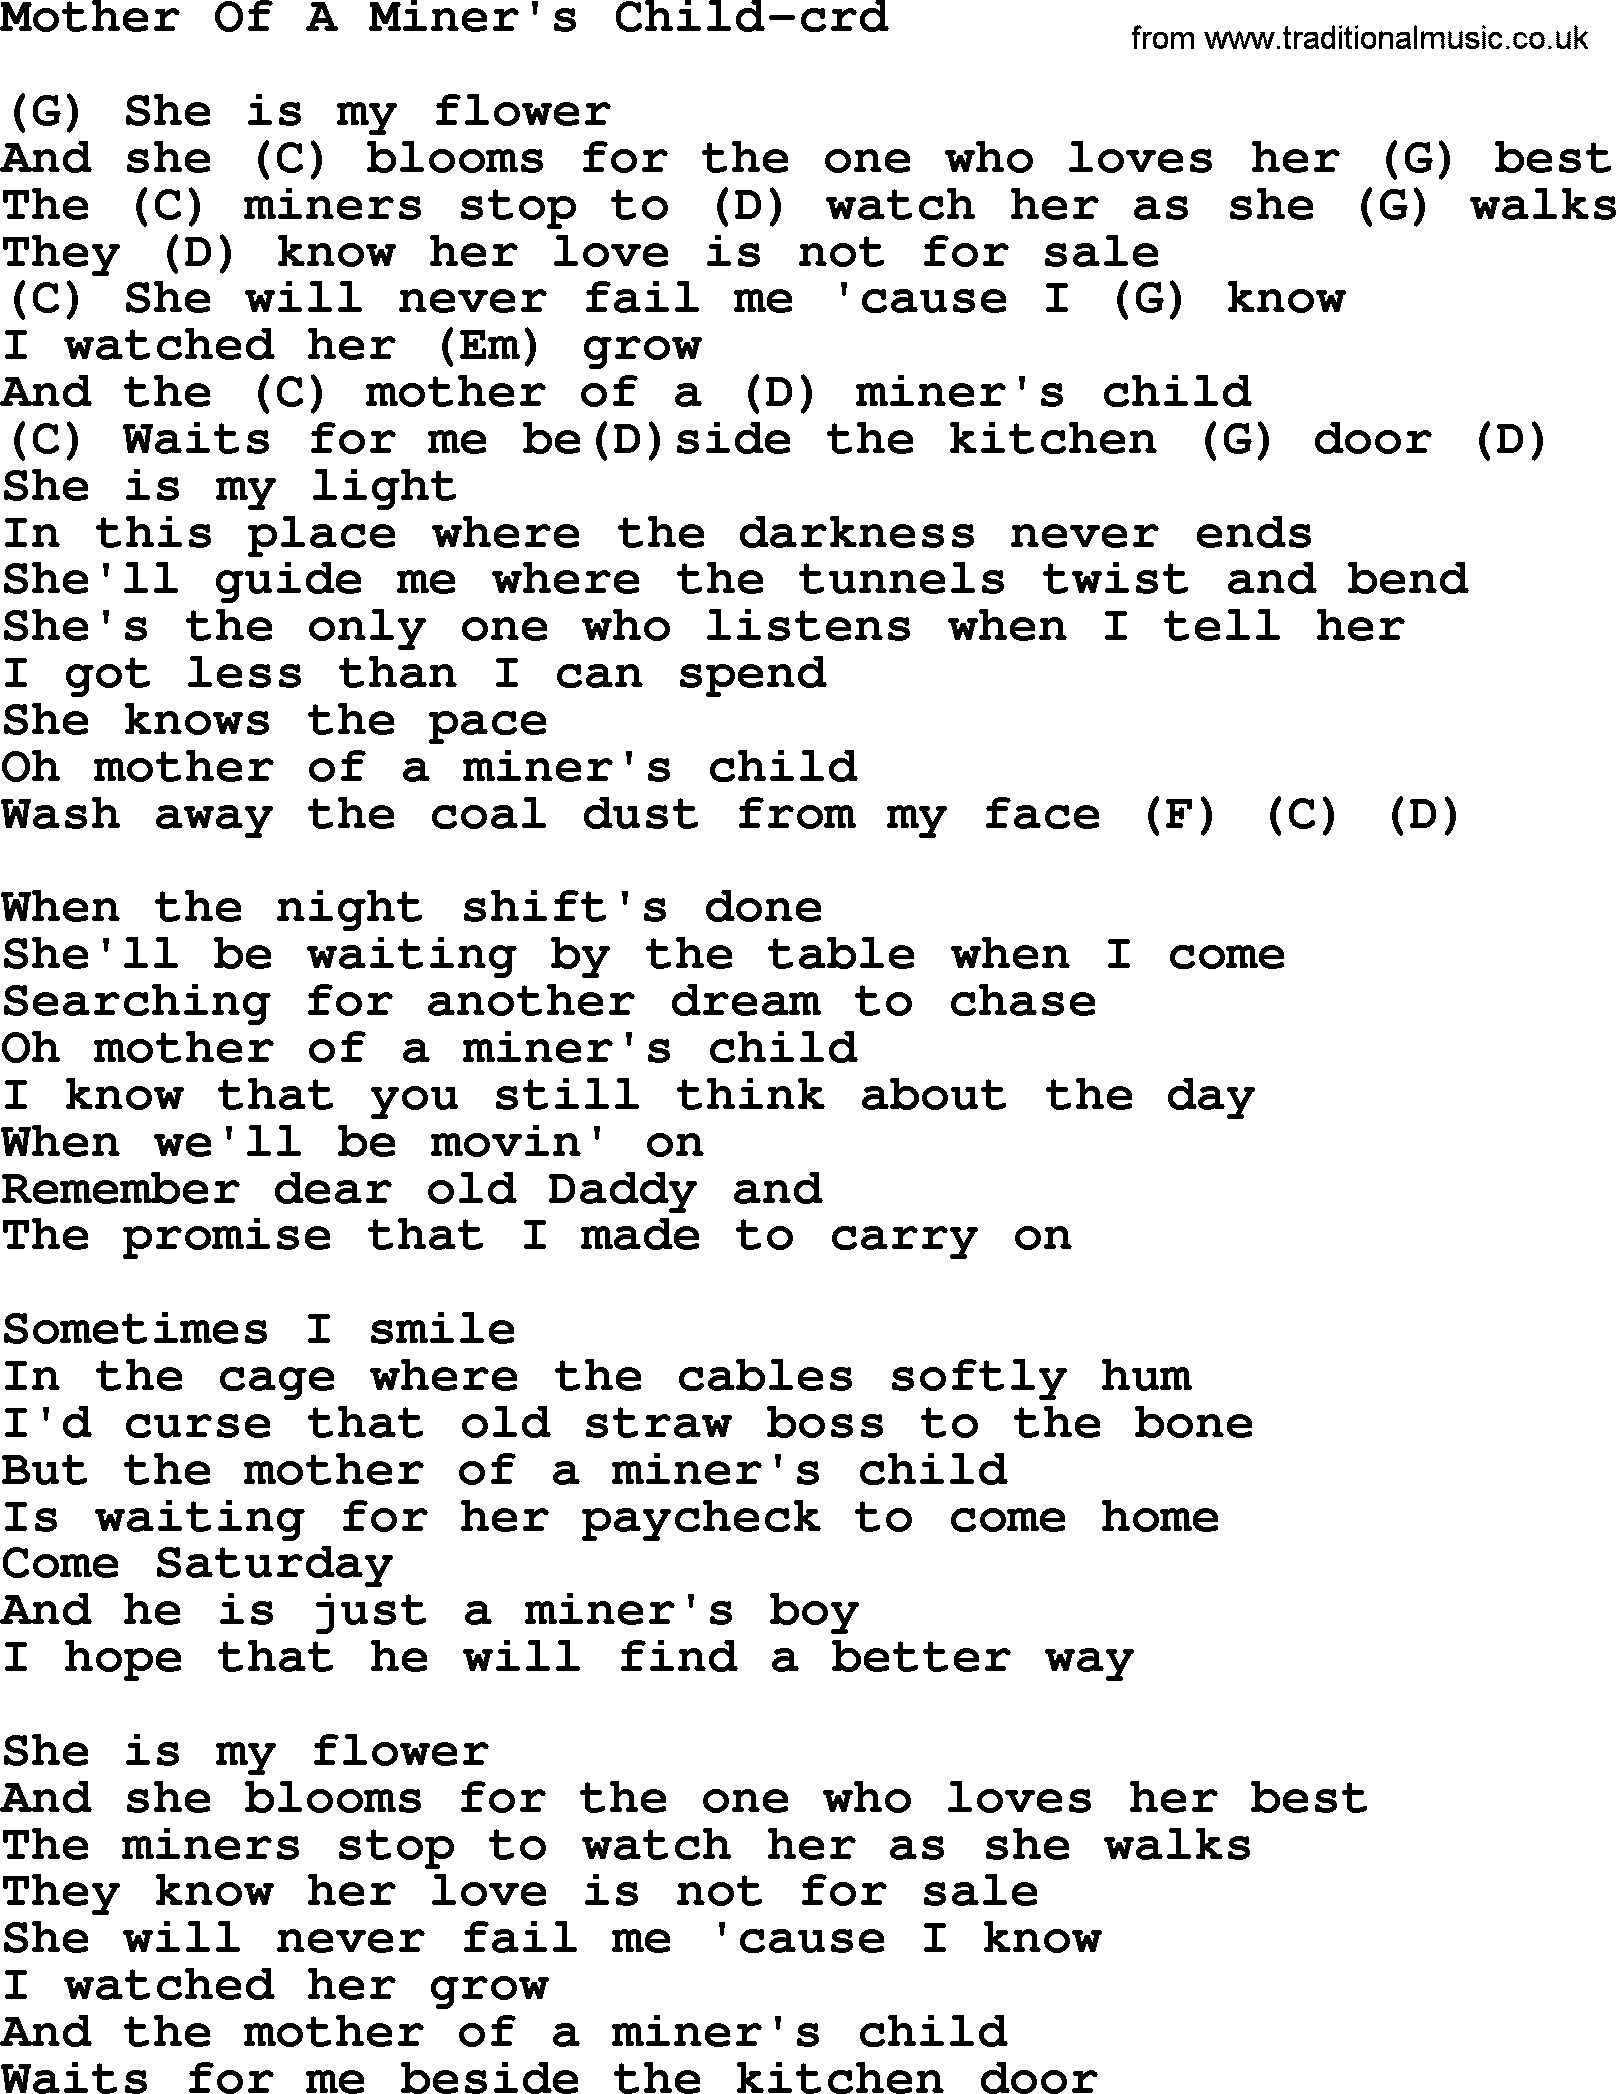 Gordon Lightfoot song Mother Of A Miner's Child, lyrics and chords